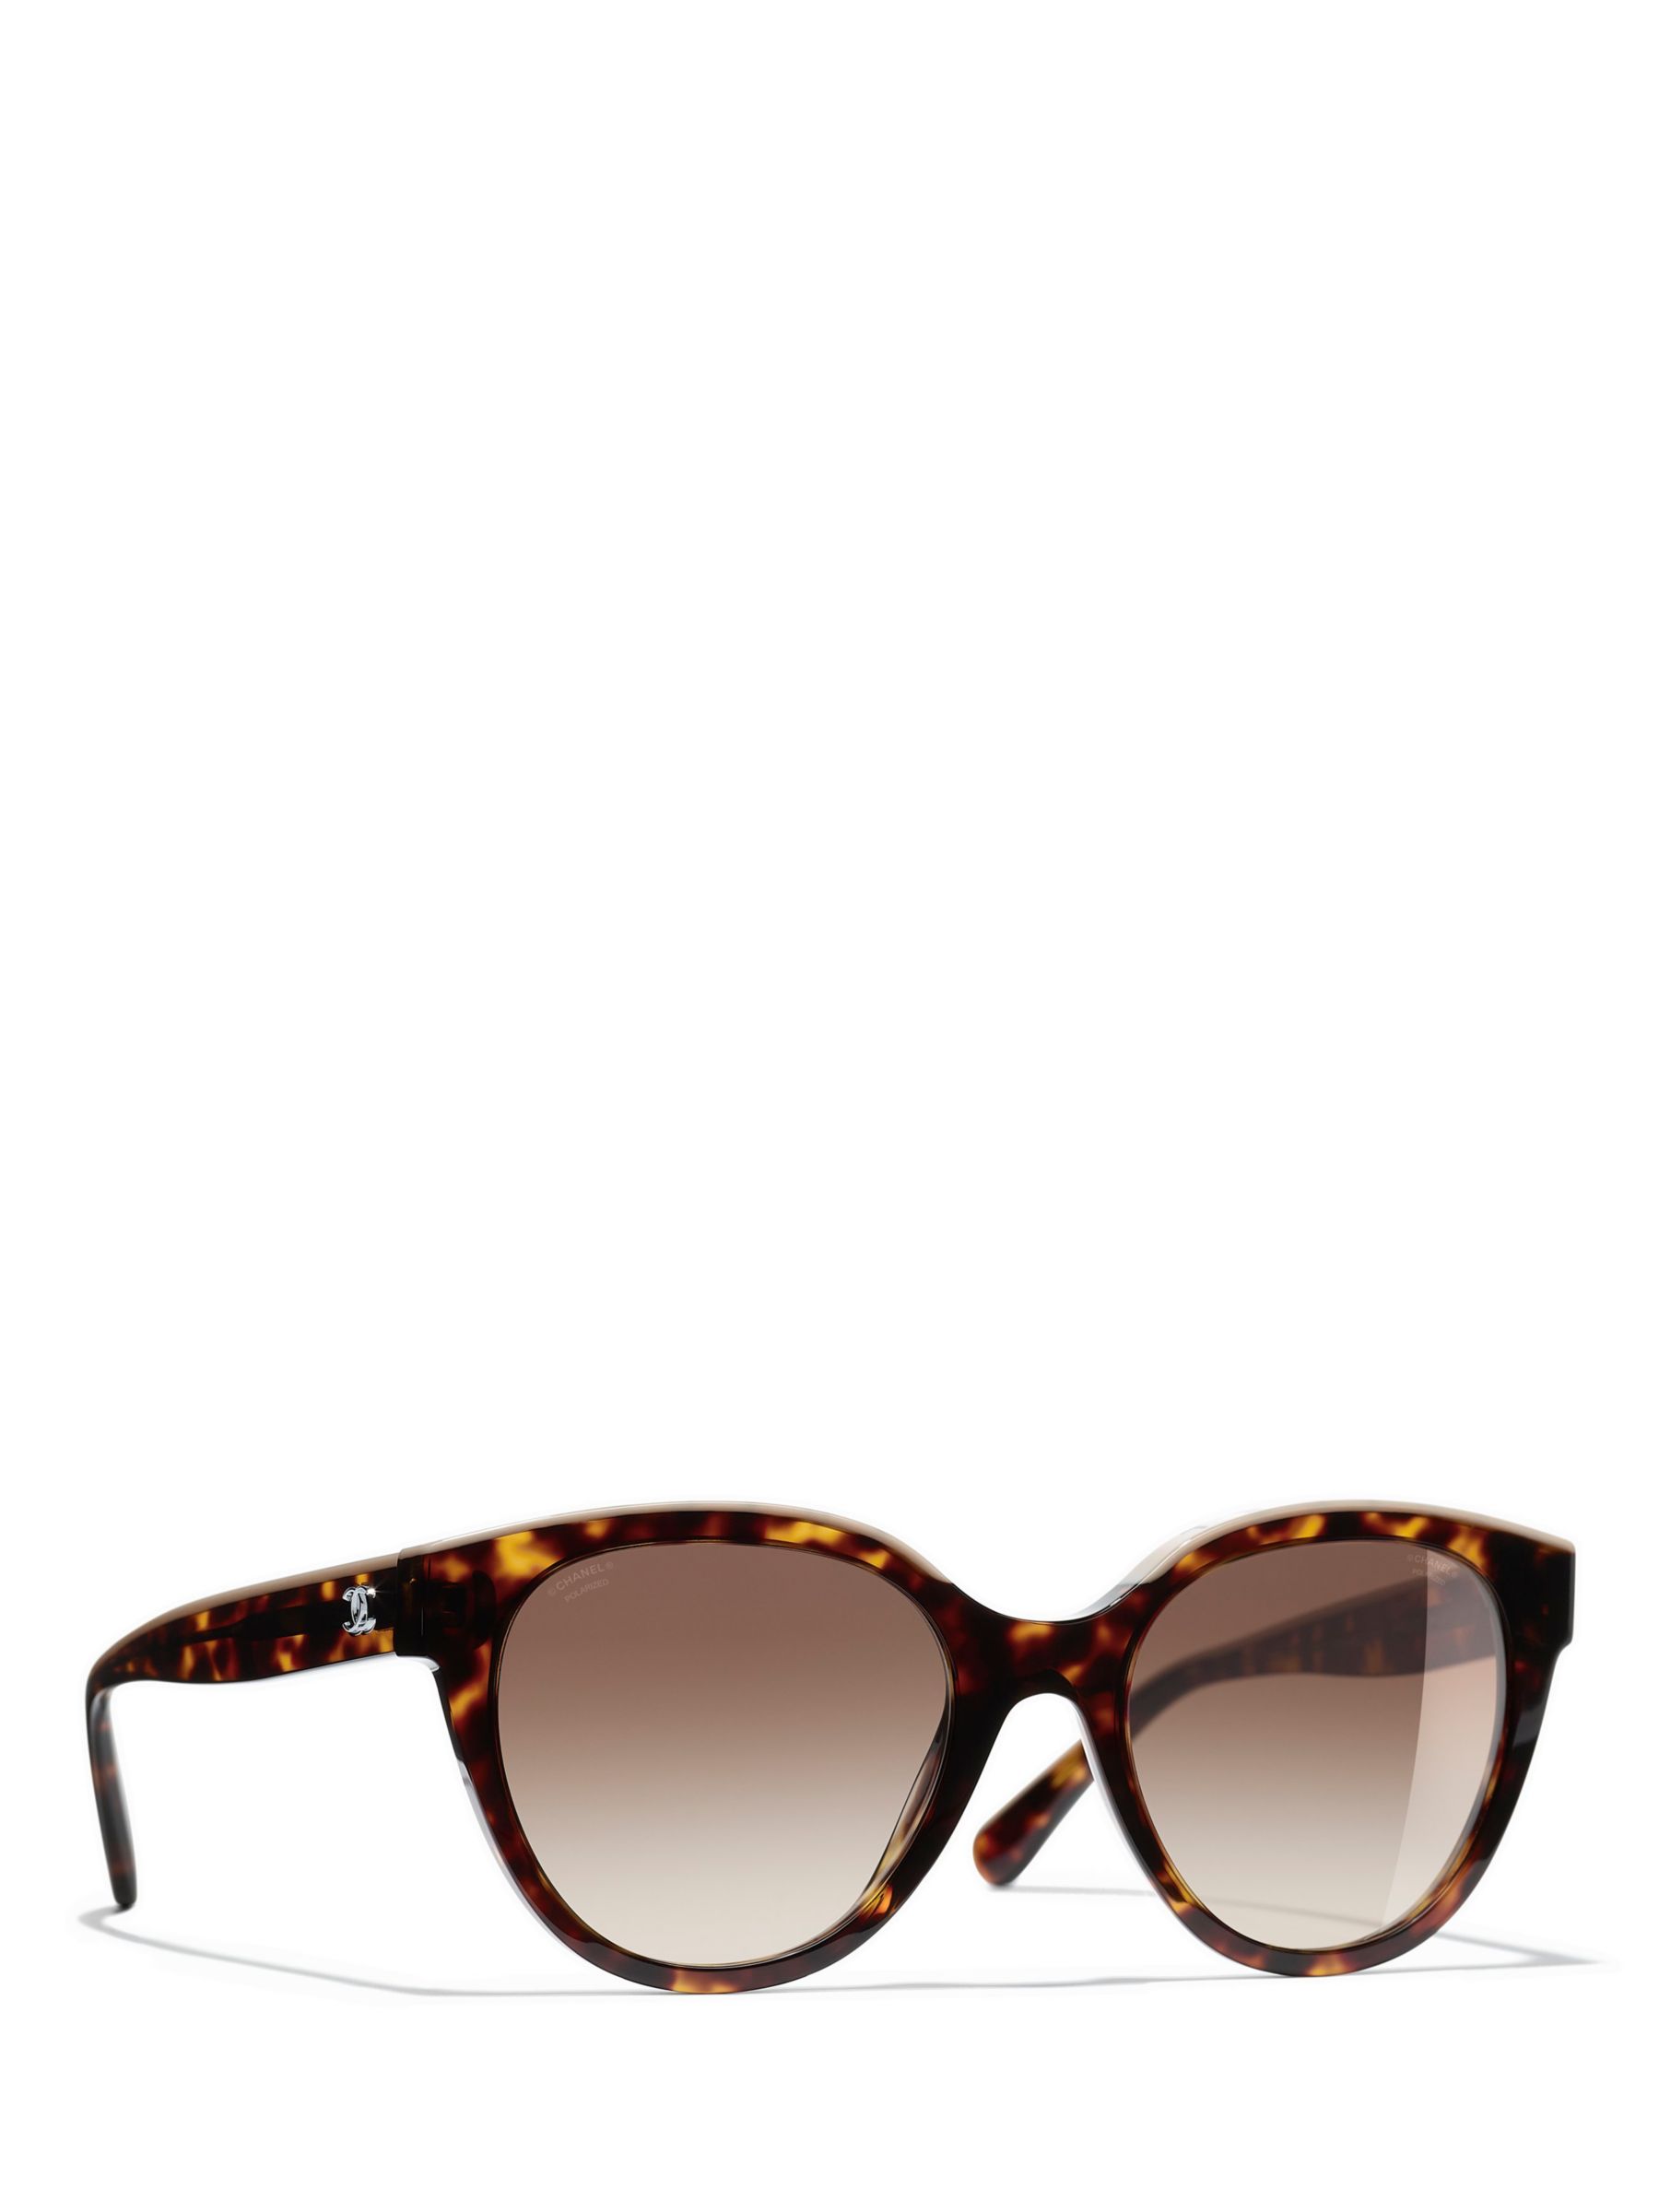 CHANEL Oval Sunglasses CH5414 Black/Beige at John Lewis & Partners